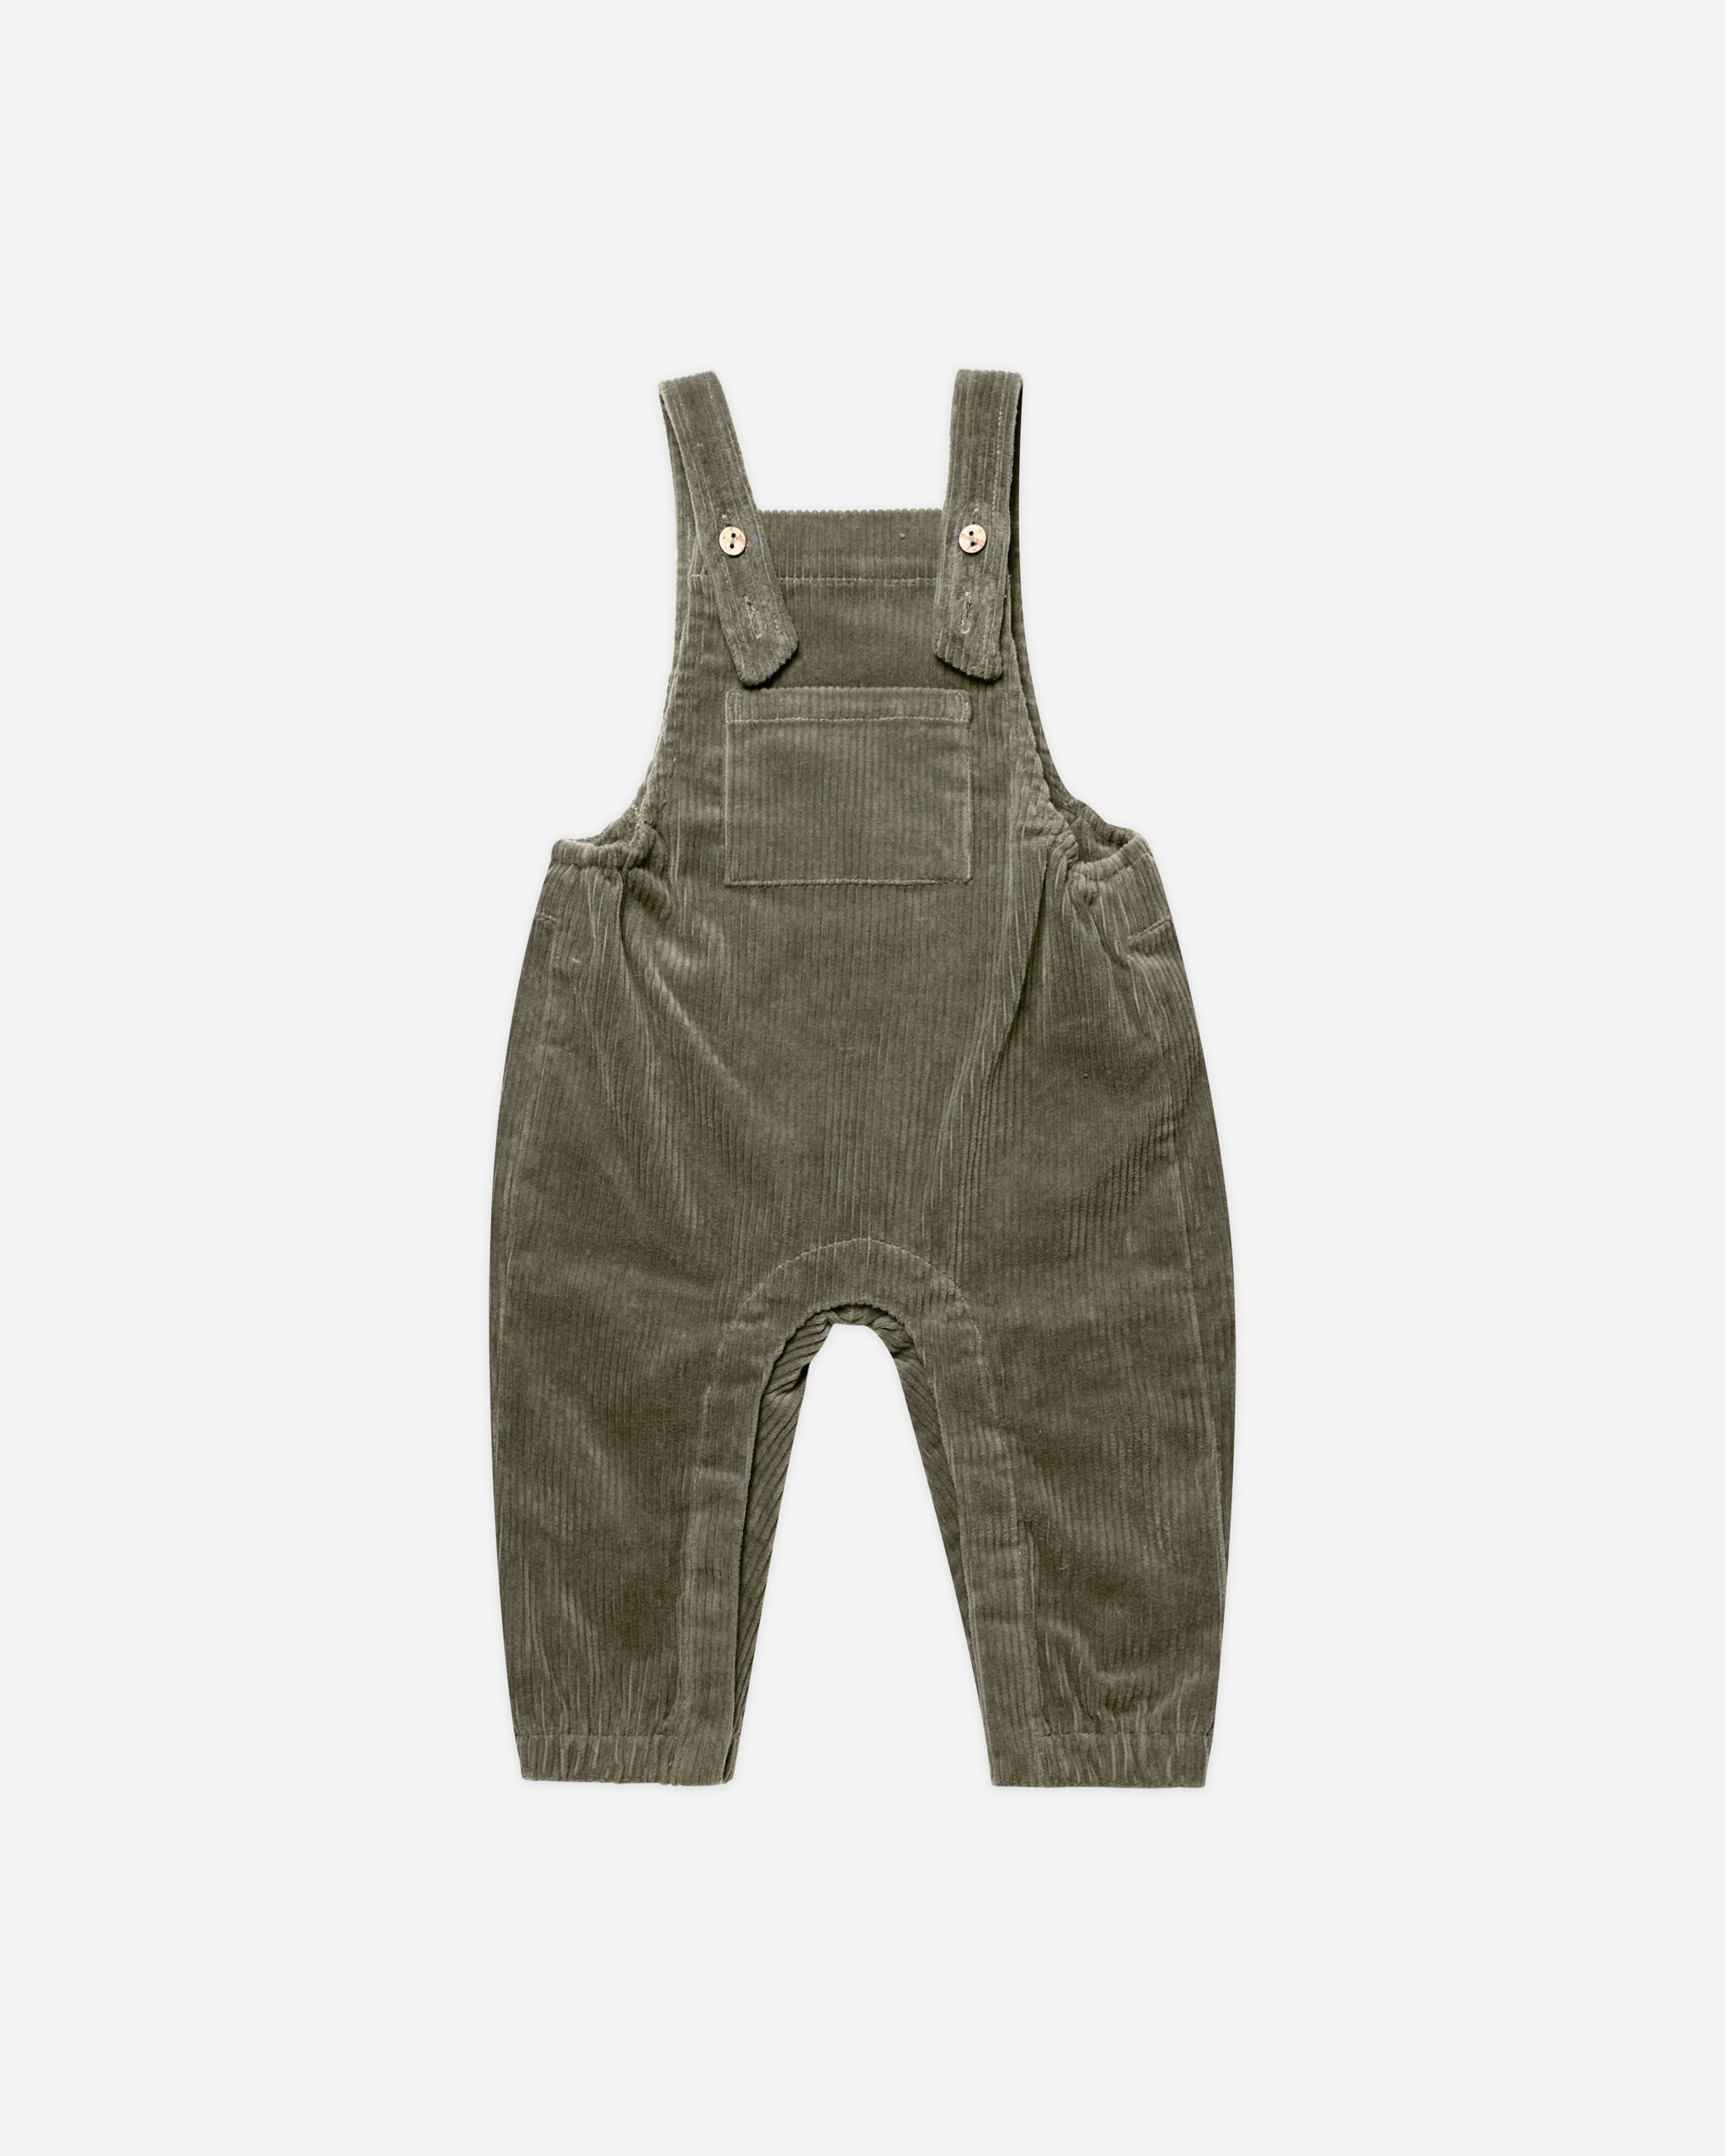 Corduroy Baby Overalls || Forest - Rylee + Cru | Kids Clothes | Trendy Baby Clothes | Modern Infant Outfits |